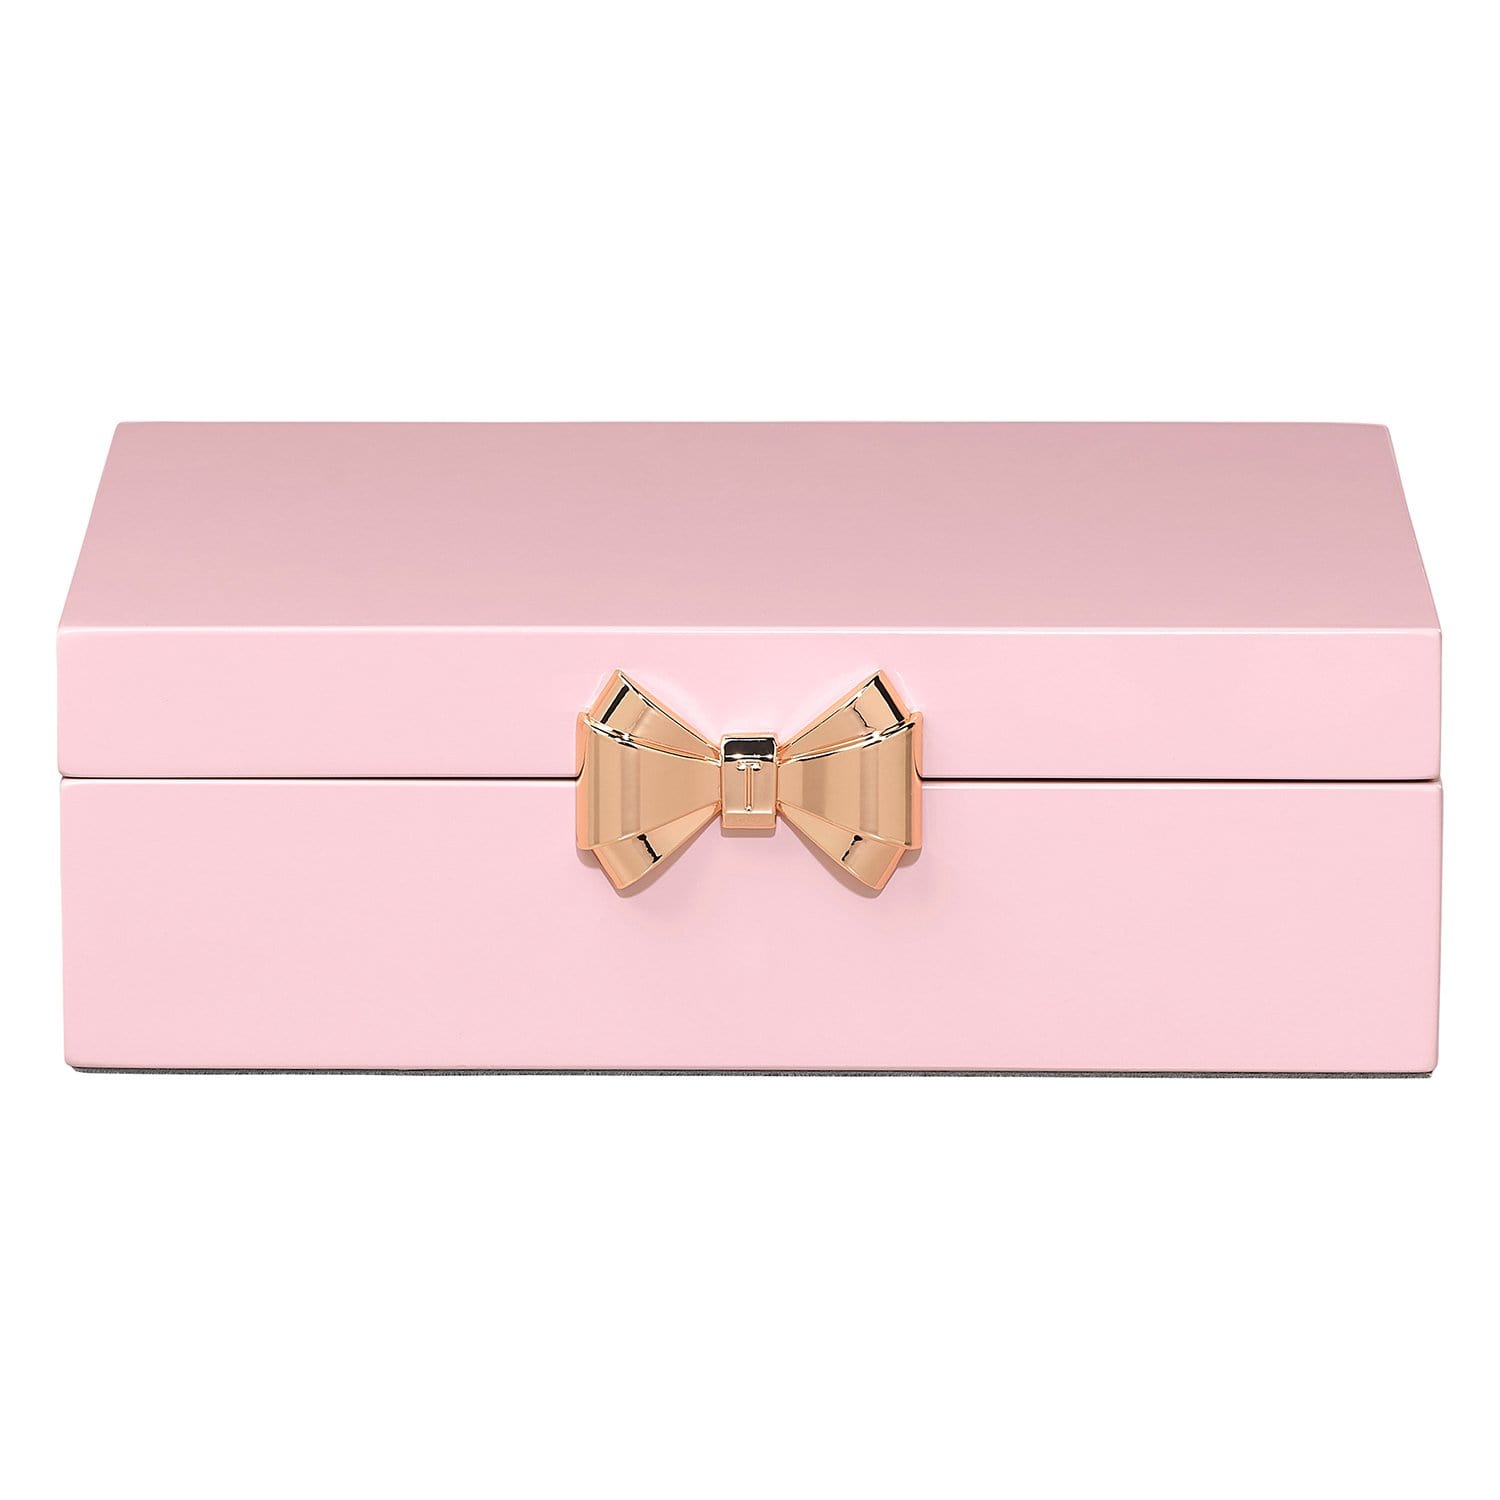 Ted Baker Lacquer Jewellery Box - Pink, Medium - TED361